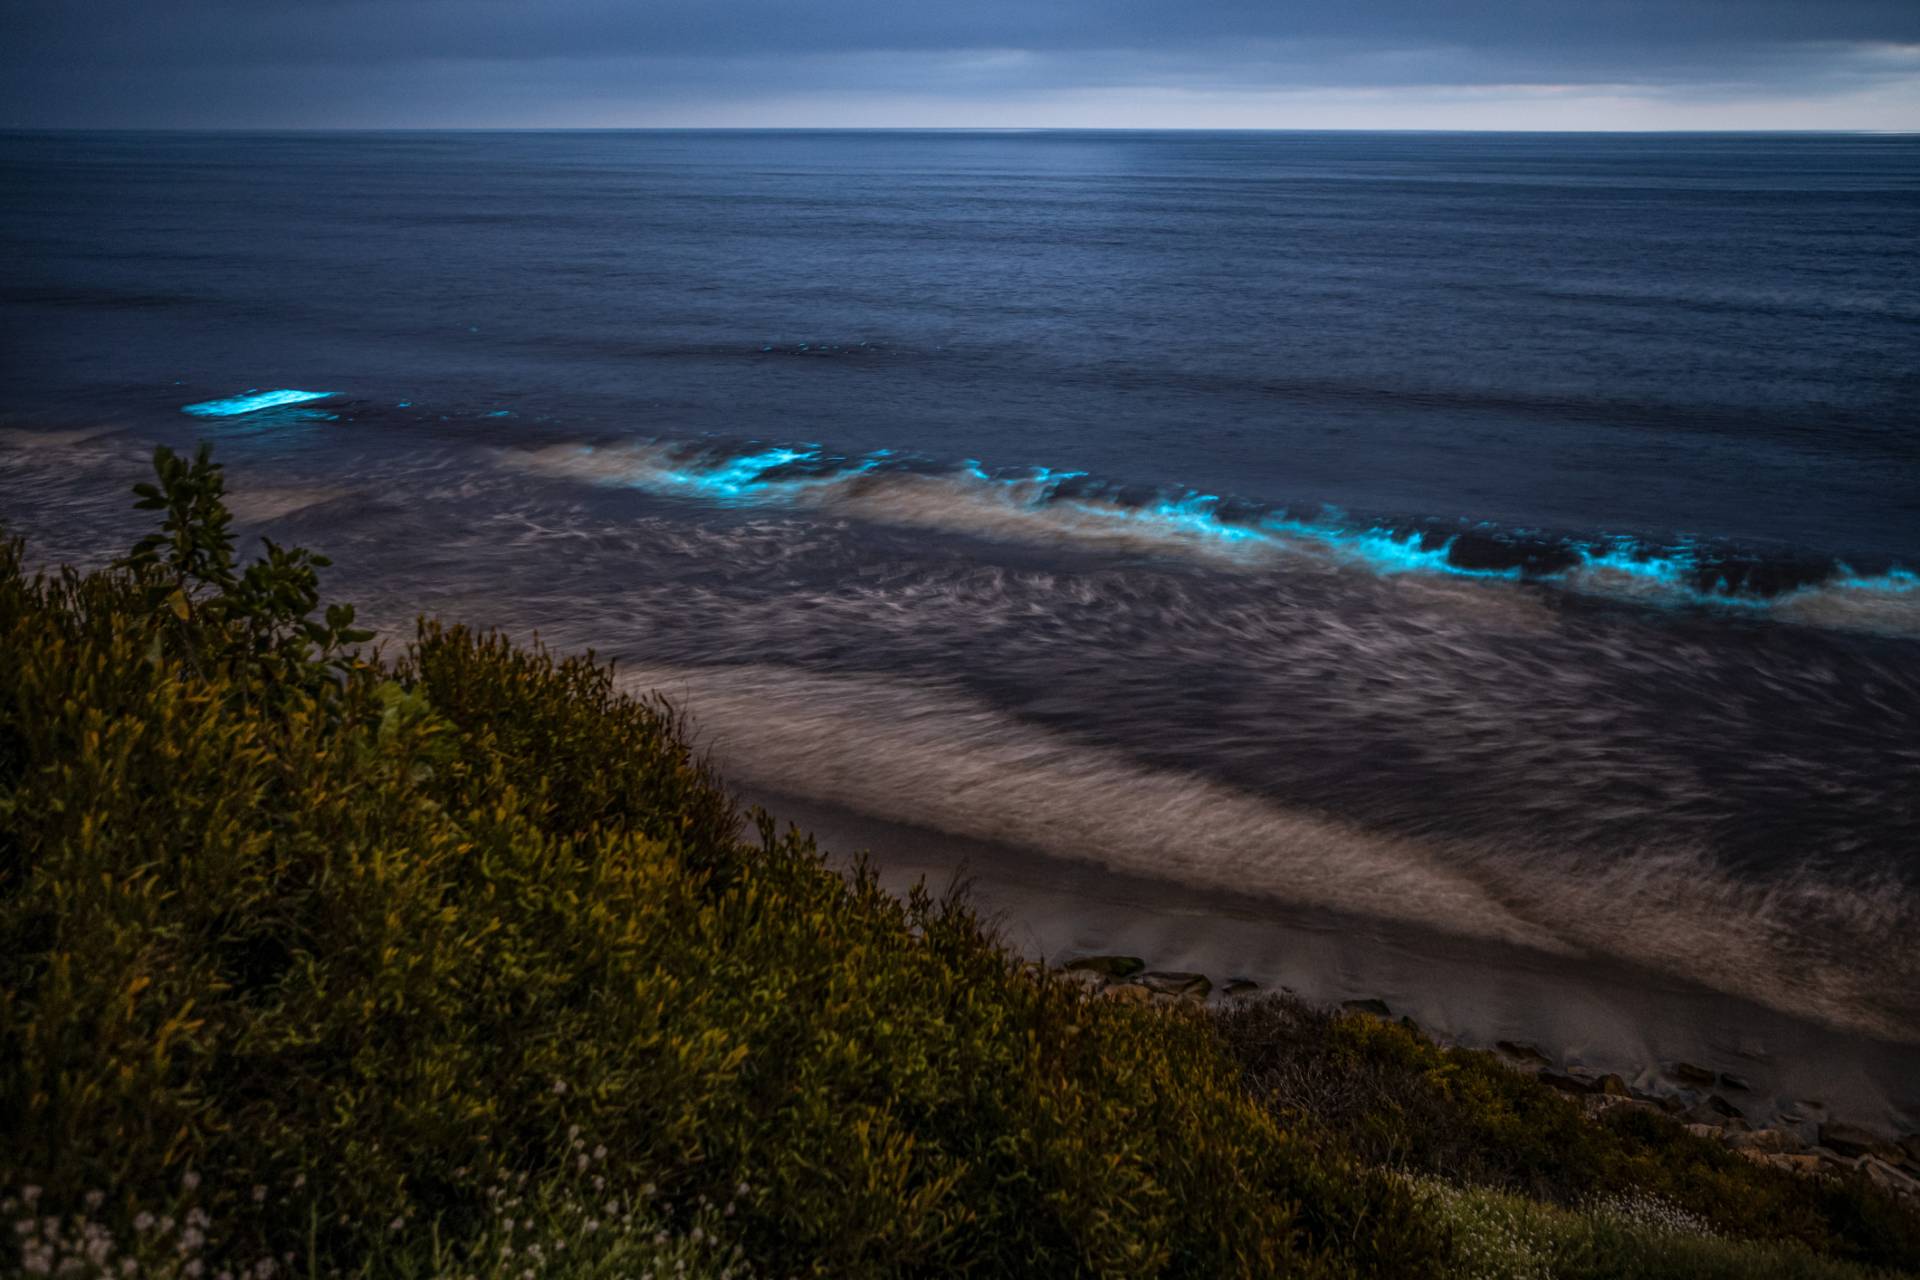 A view of the waves on a shoreline glows bright blue.